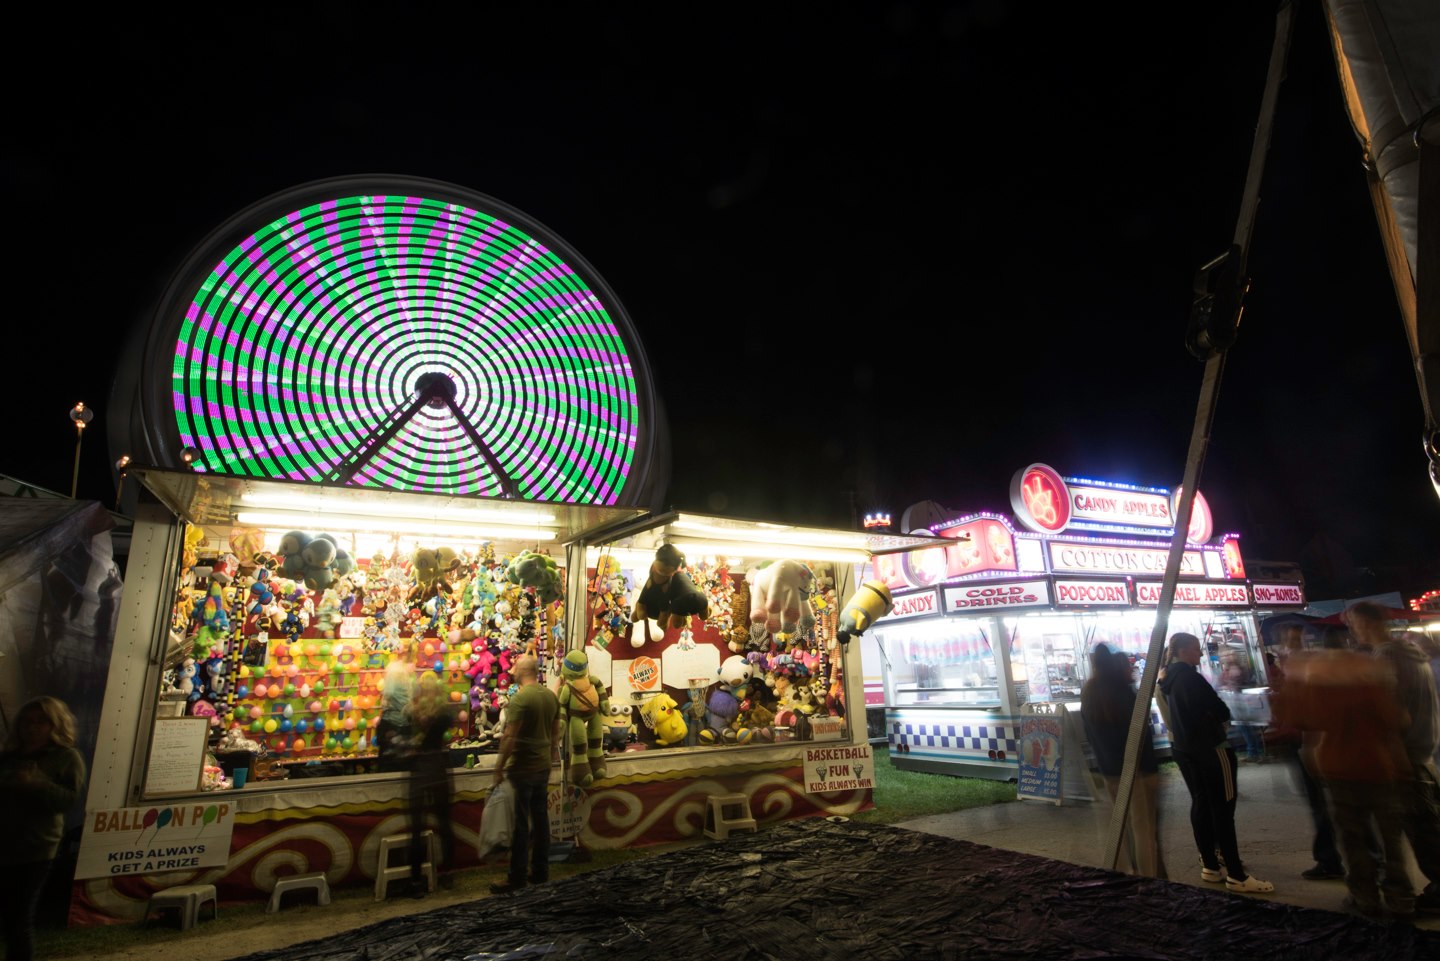 The fair at night is a whole new scene, lights, activity, and a different crowd